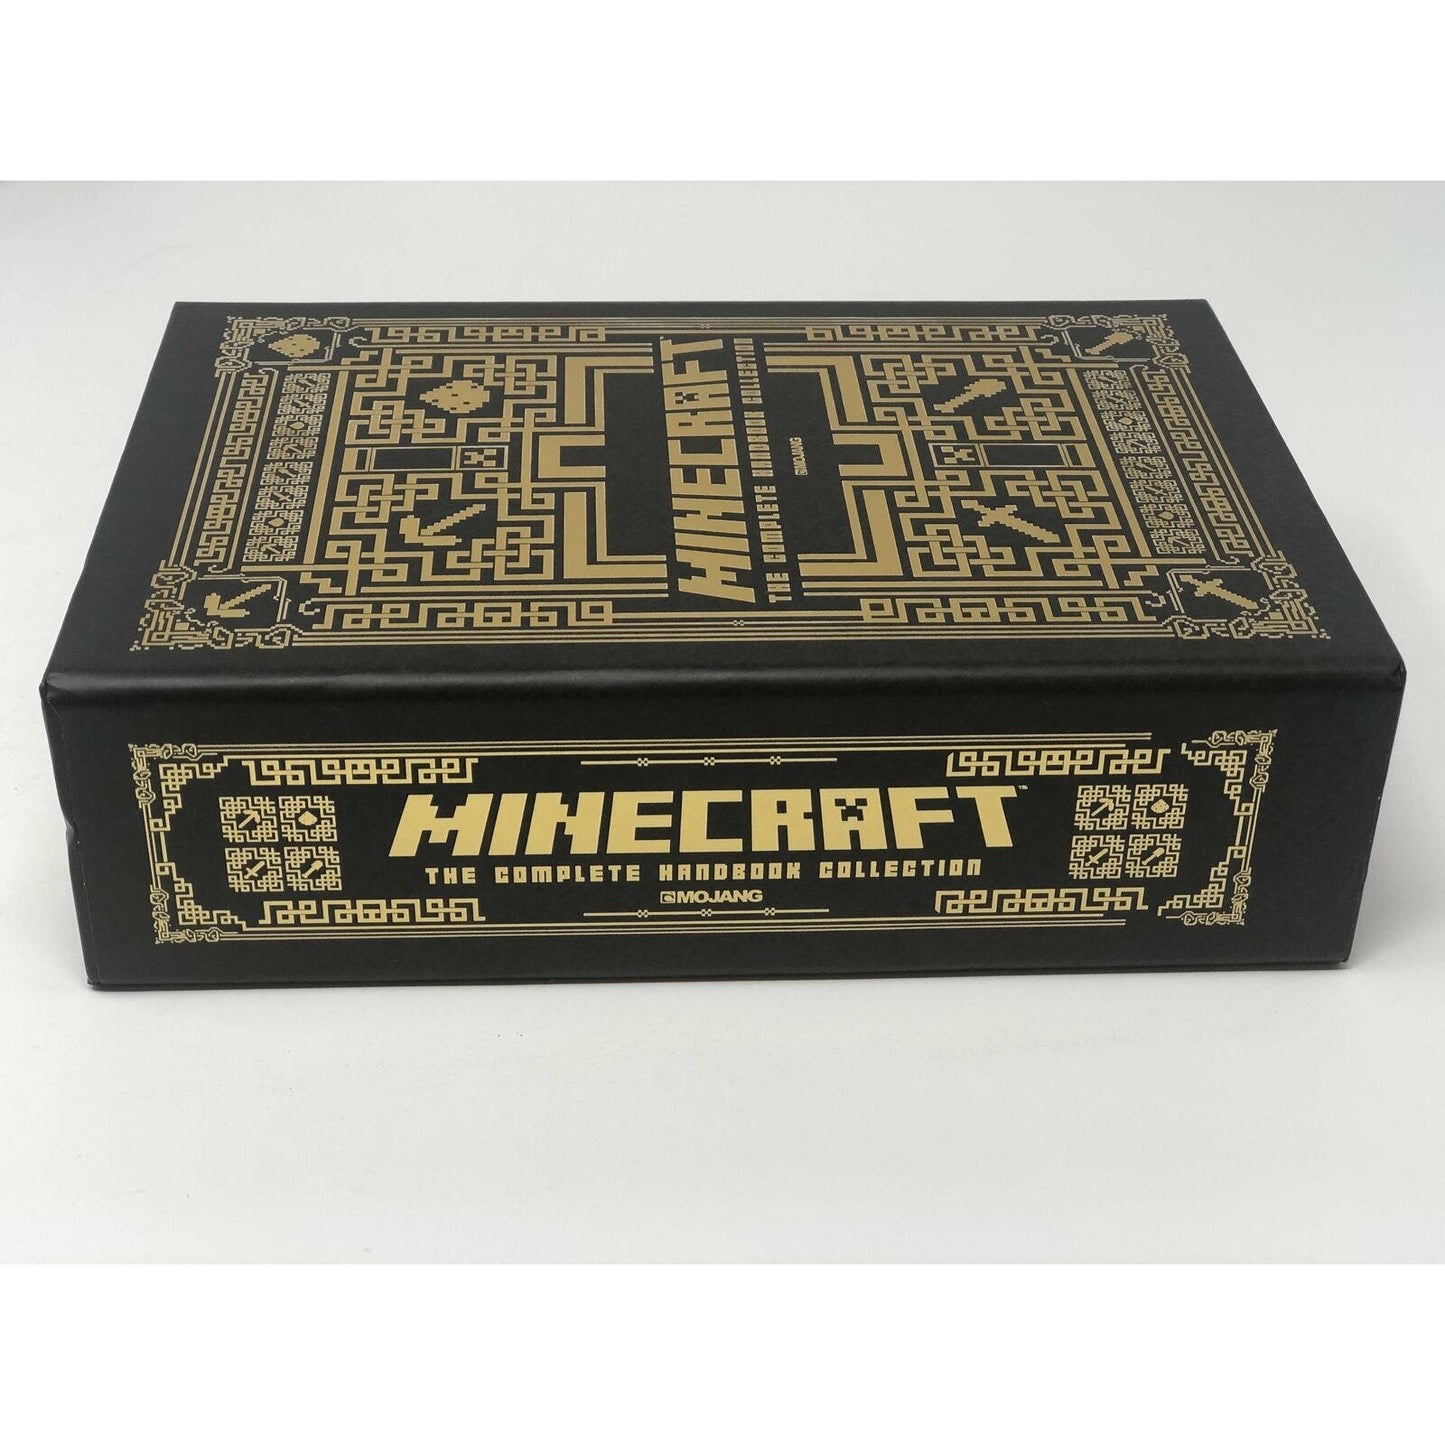 (First Edition) MINECRAFT: THE COMPLETE HANDBOOK COLLECTION by Mojang - Uncle Buddy's Beard & Used Books